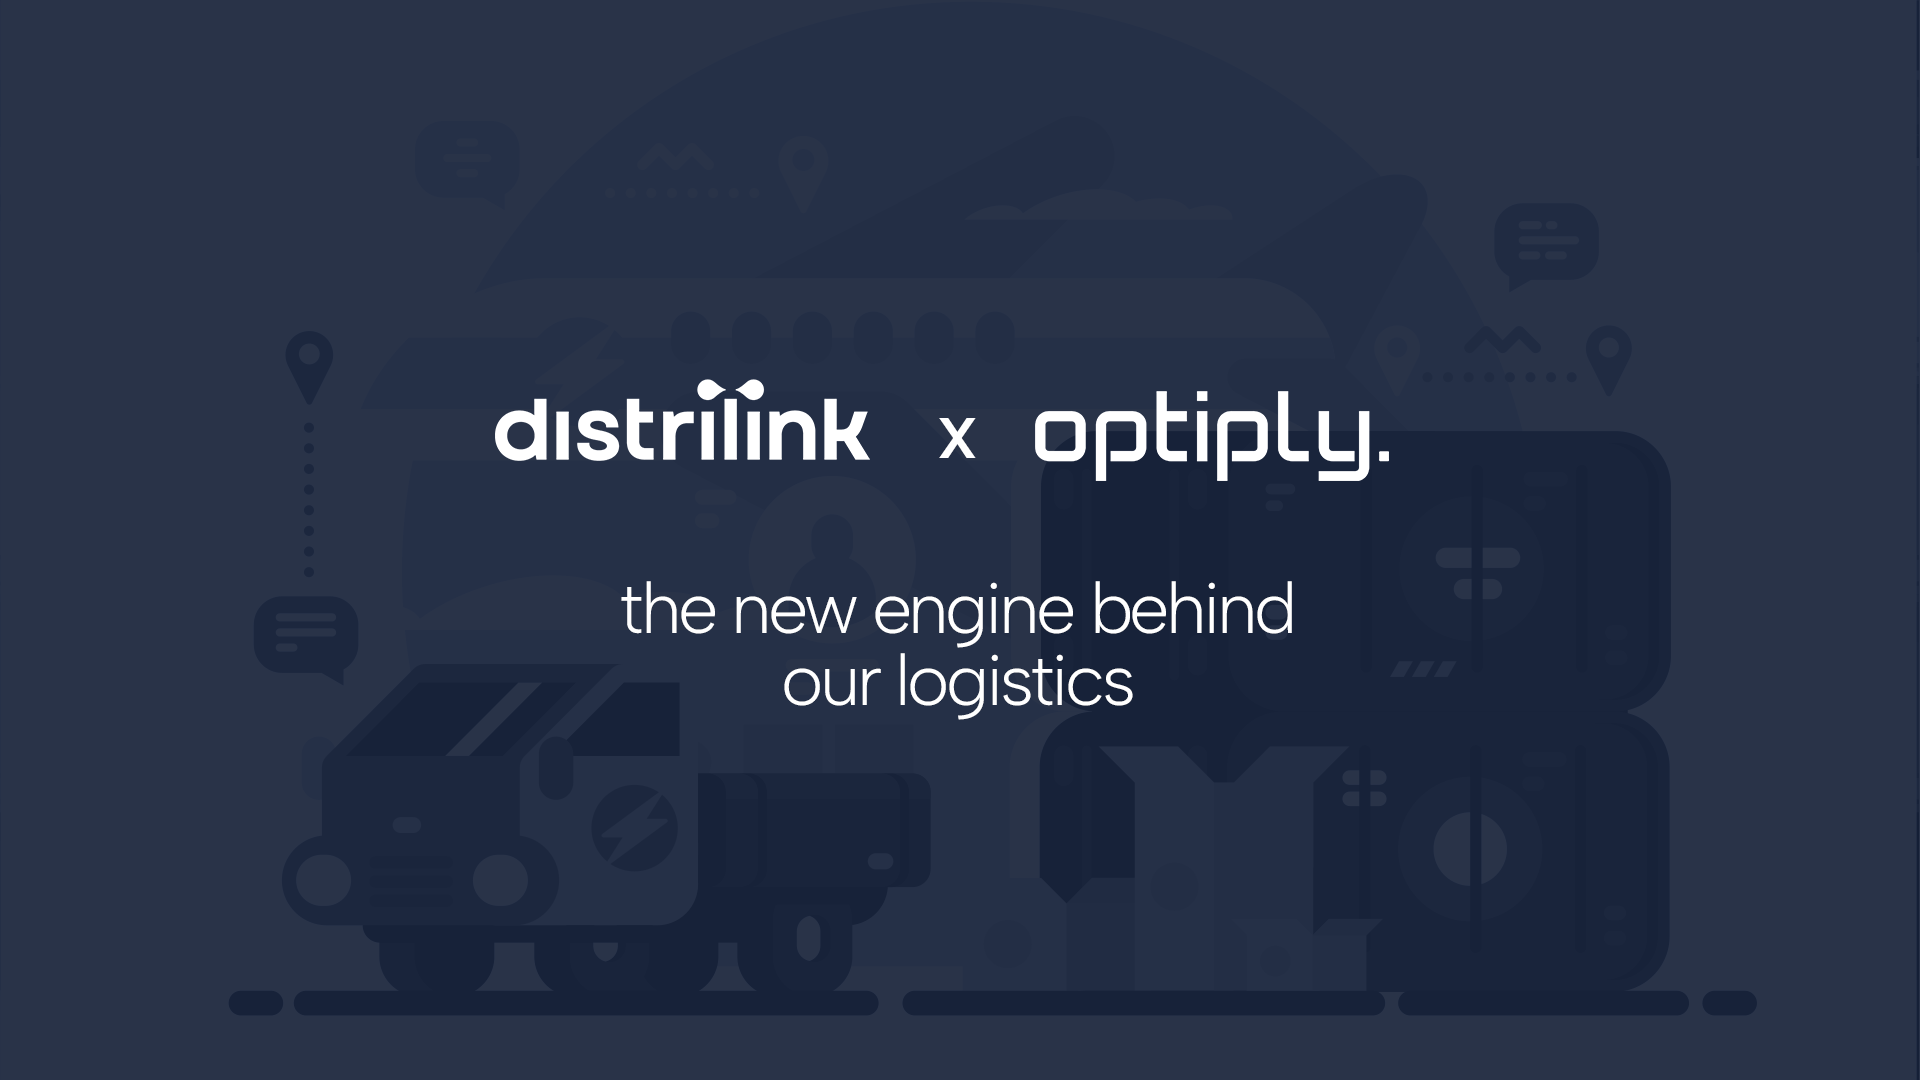 The new engine behind our logistics: Optiply